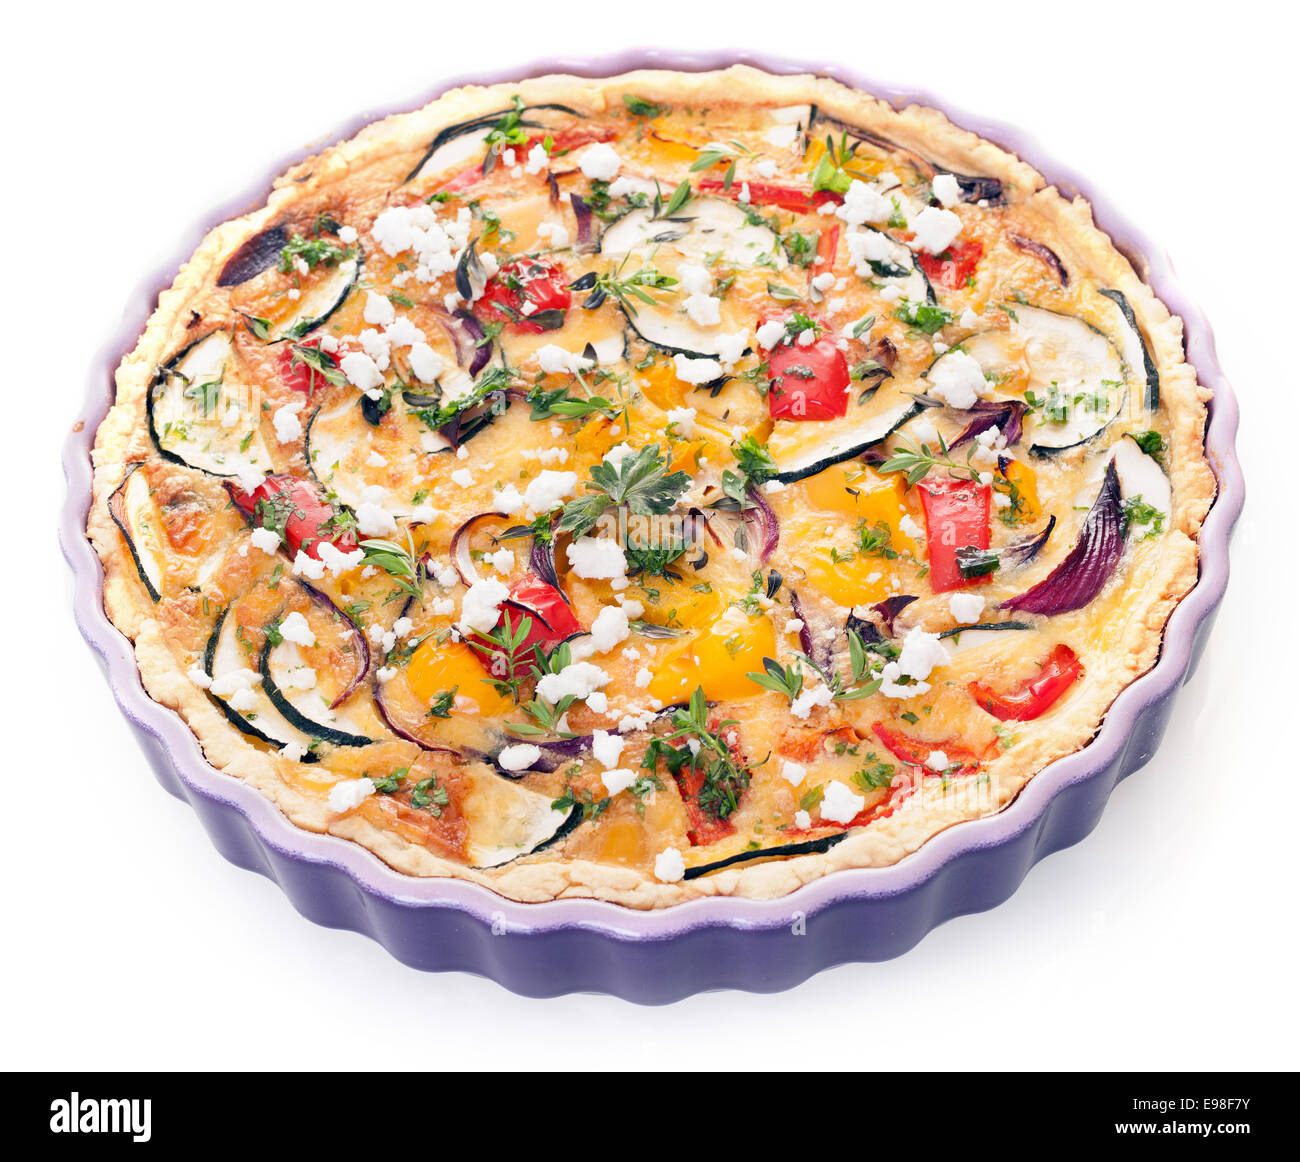 Vegetarian eggplant quiche in a decorative fluted oven dish with egg, cheese, peppers, tomato and herbs for a healthy meal, high angle isolated on white Stock Photo